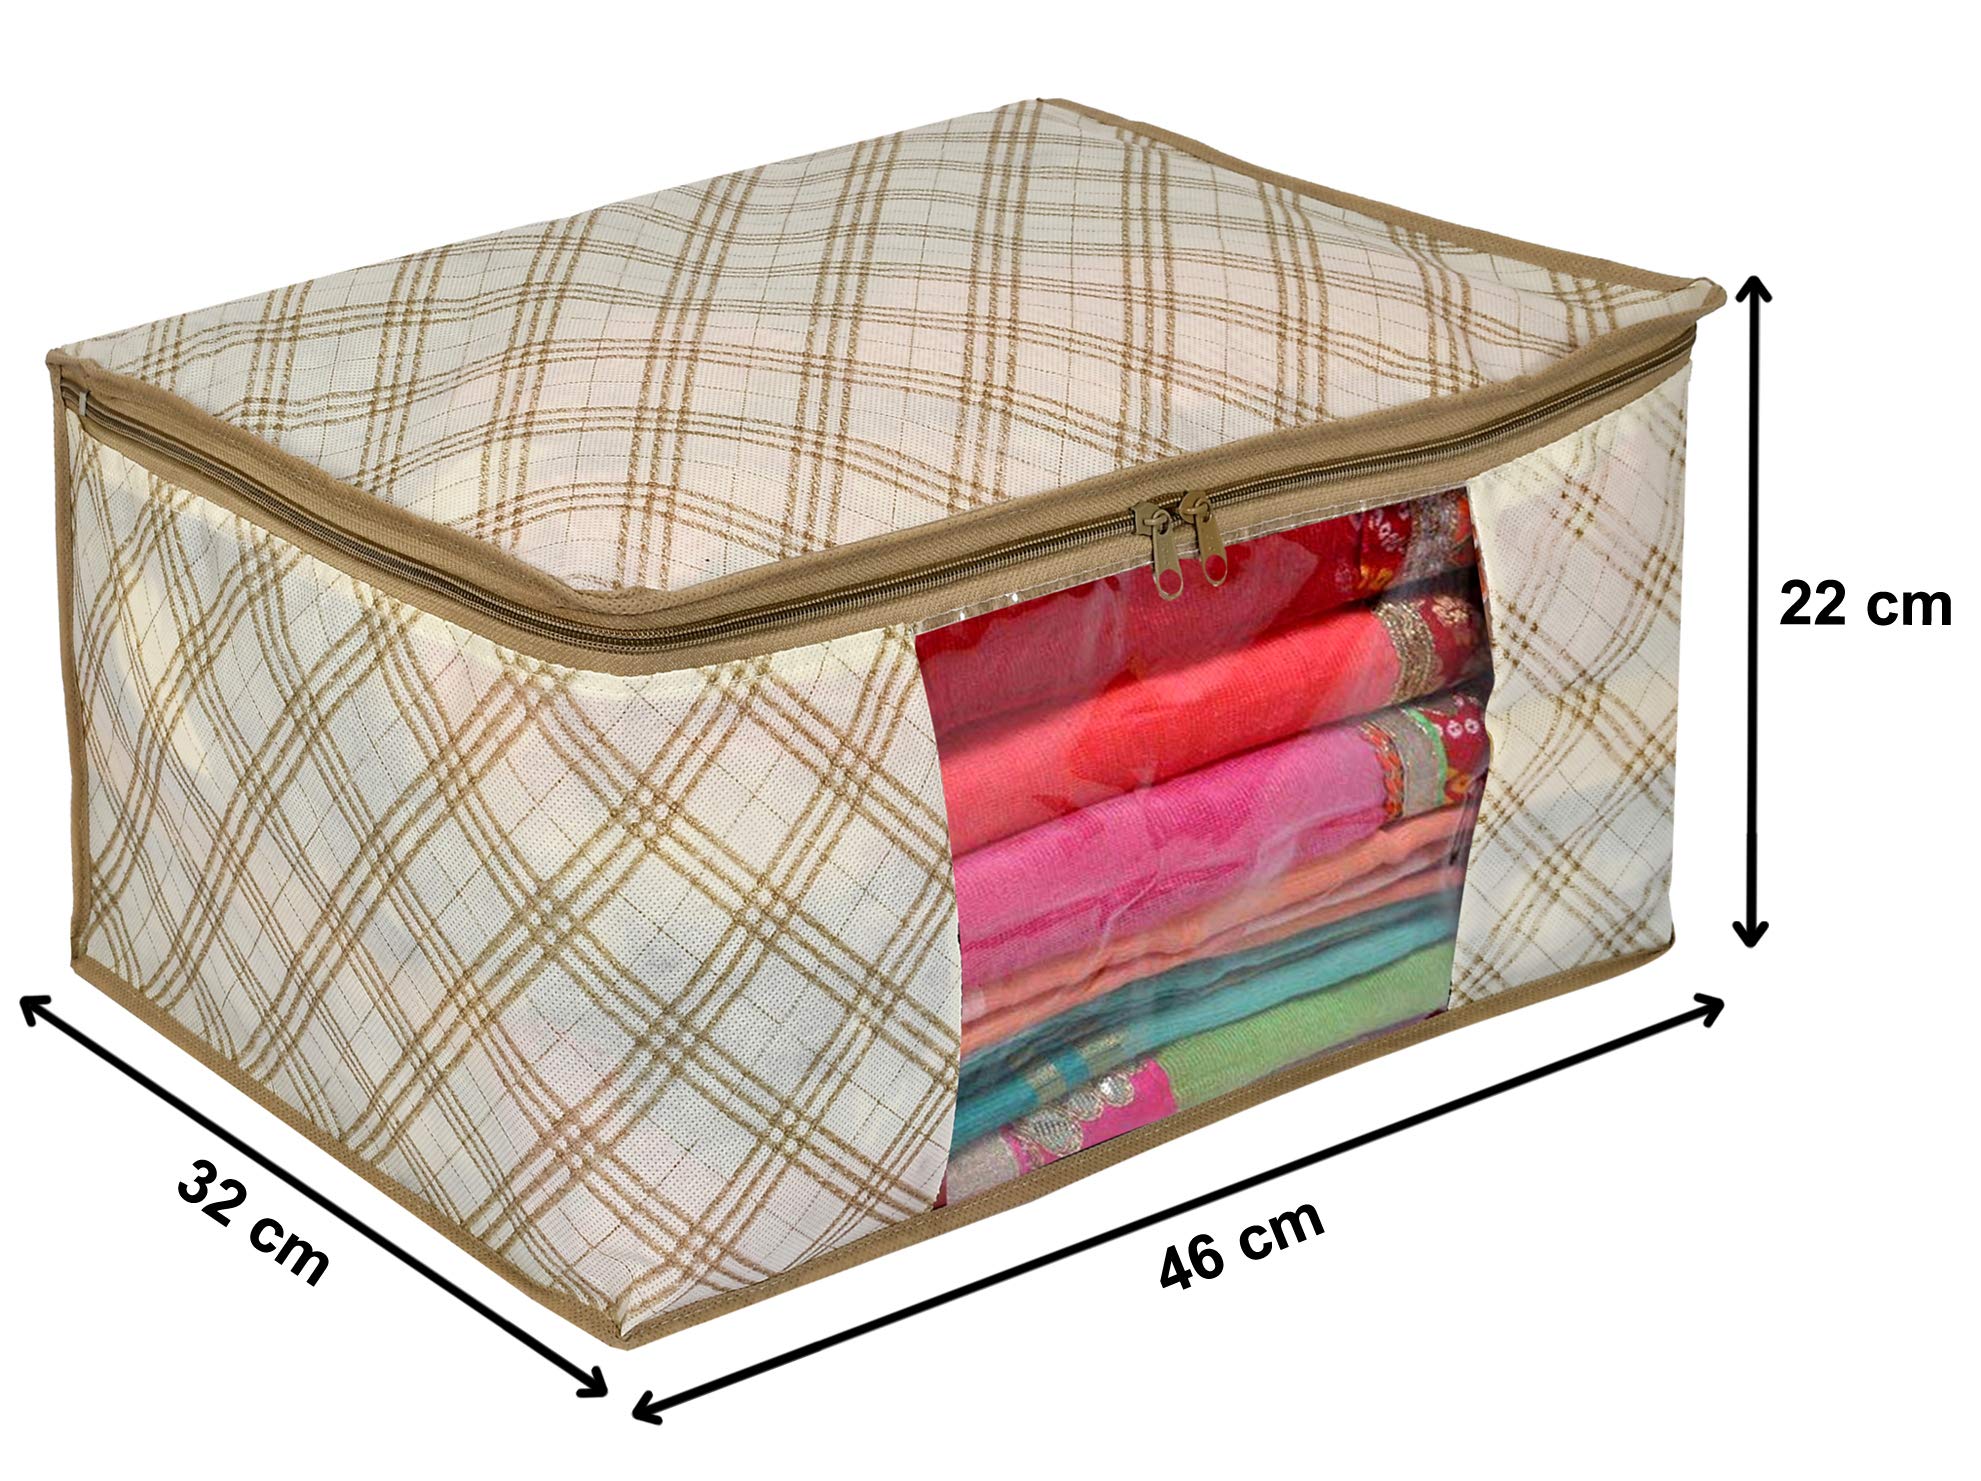 Kuber Industries Metalic Checkered Print Non-woven Foldable Saree Cover|Storage Bag/Wardrobe Organizer|Zipper Closer With Transparent Window|Size 46 x 32 x 22 CM|Pack of 3 (Ivory)-KUBMART16504, cotton